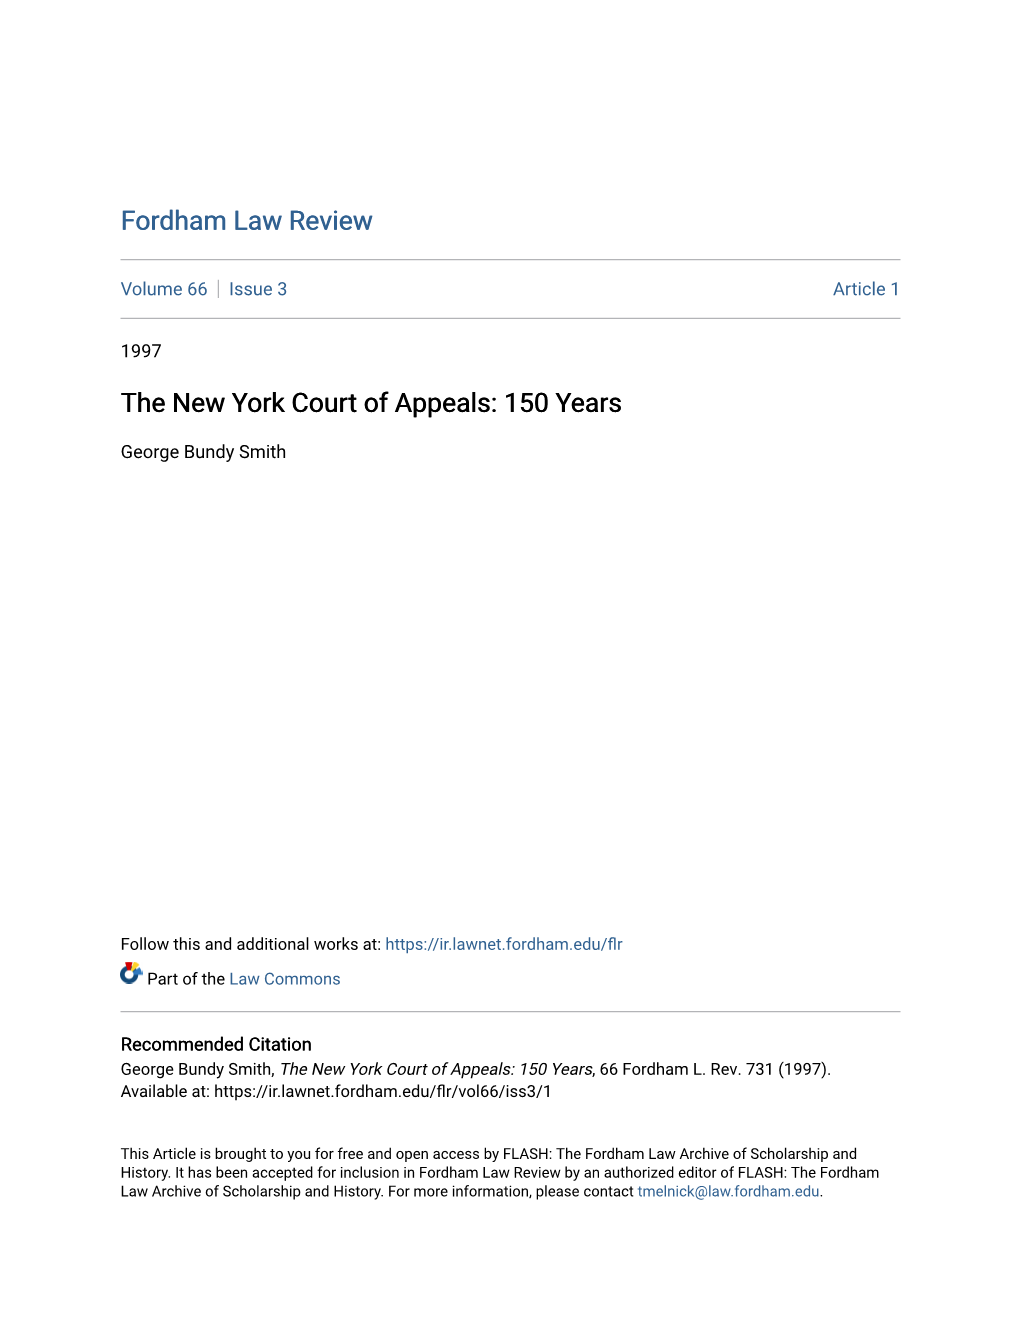 The New York Court of Appeals: 150 Years